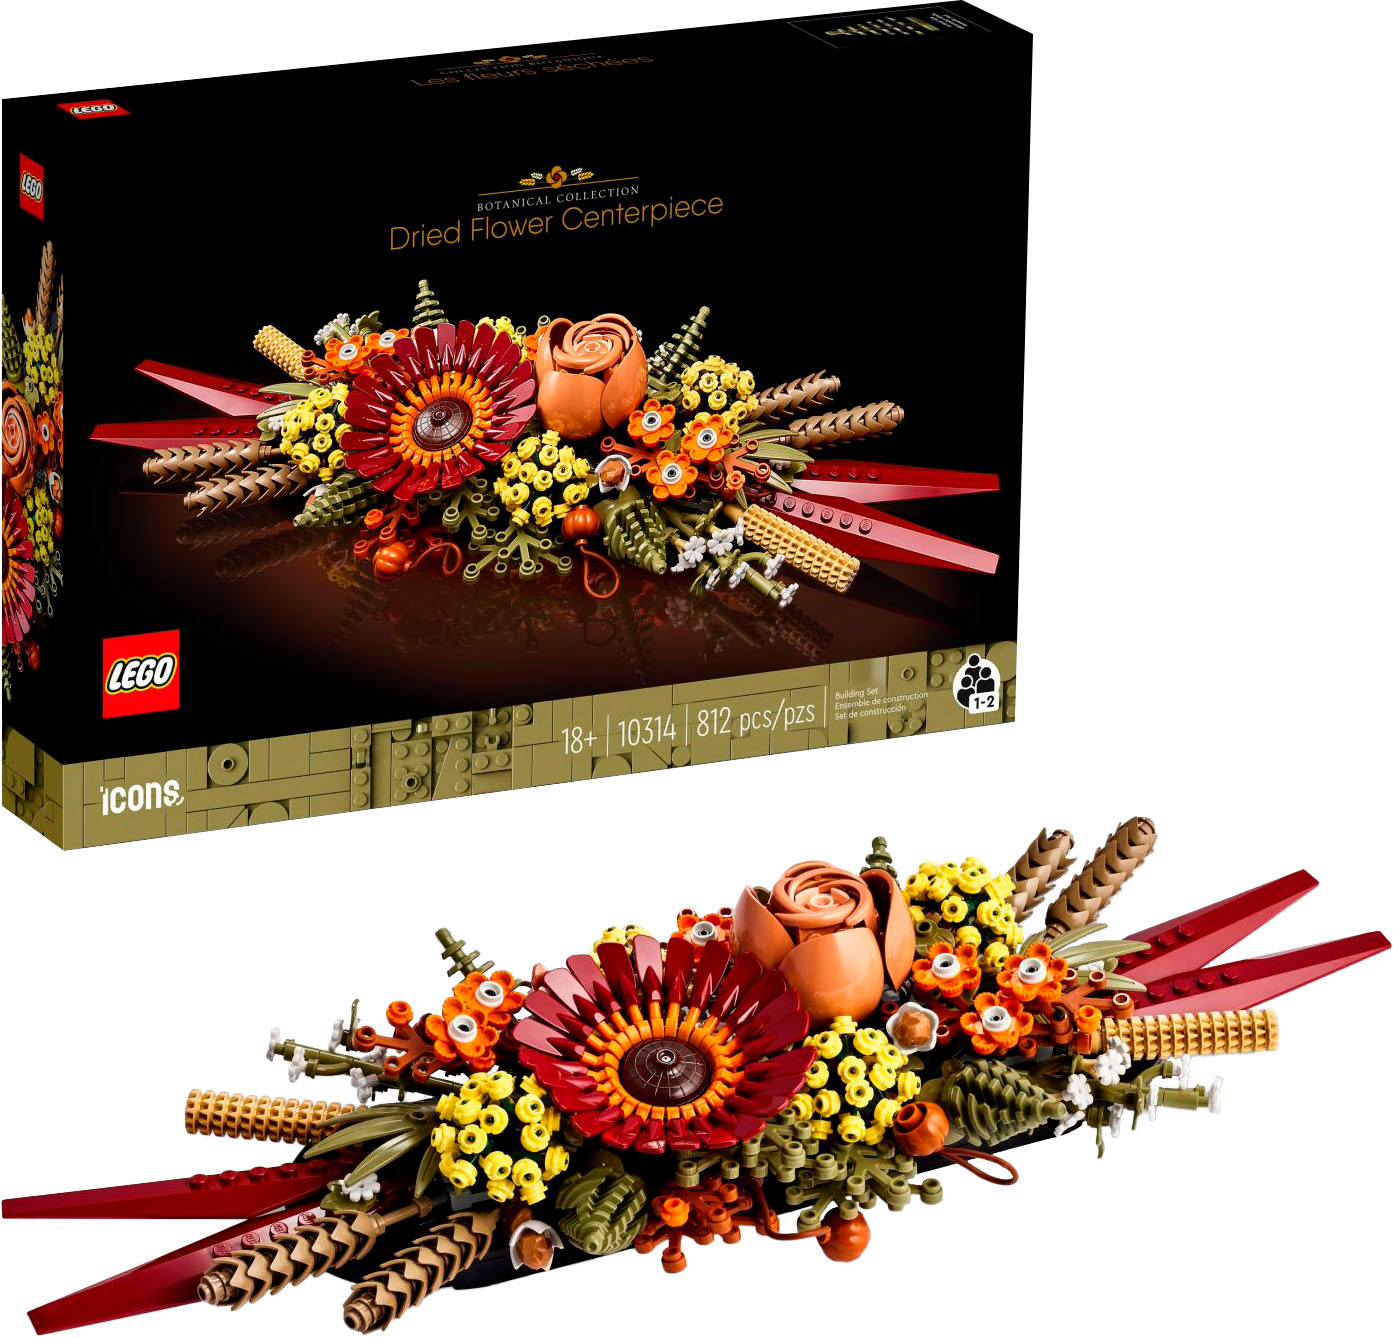 Lego 10314 Icons Dried Flower Centerpiece